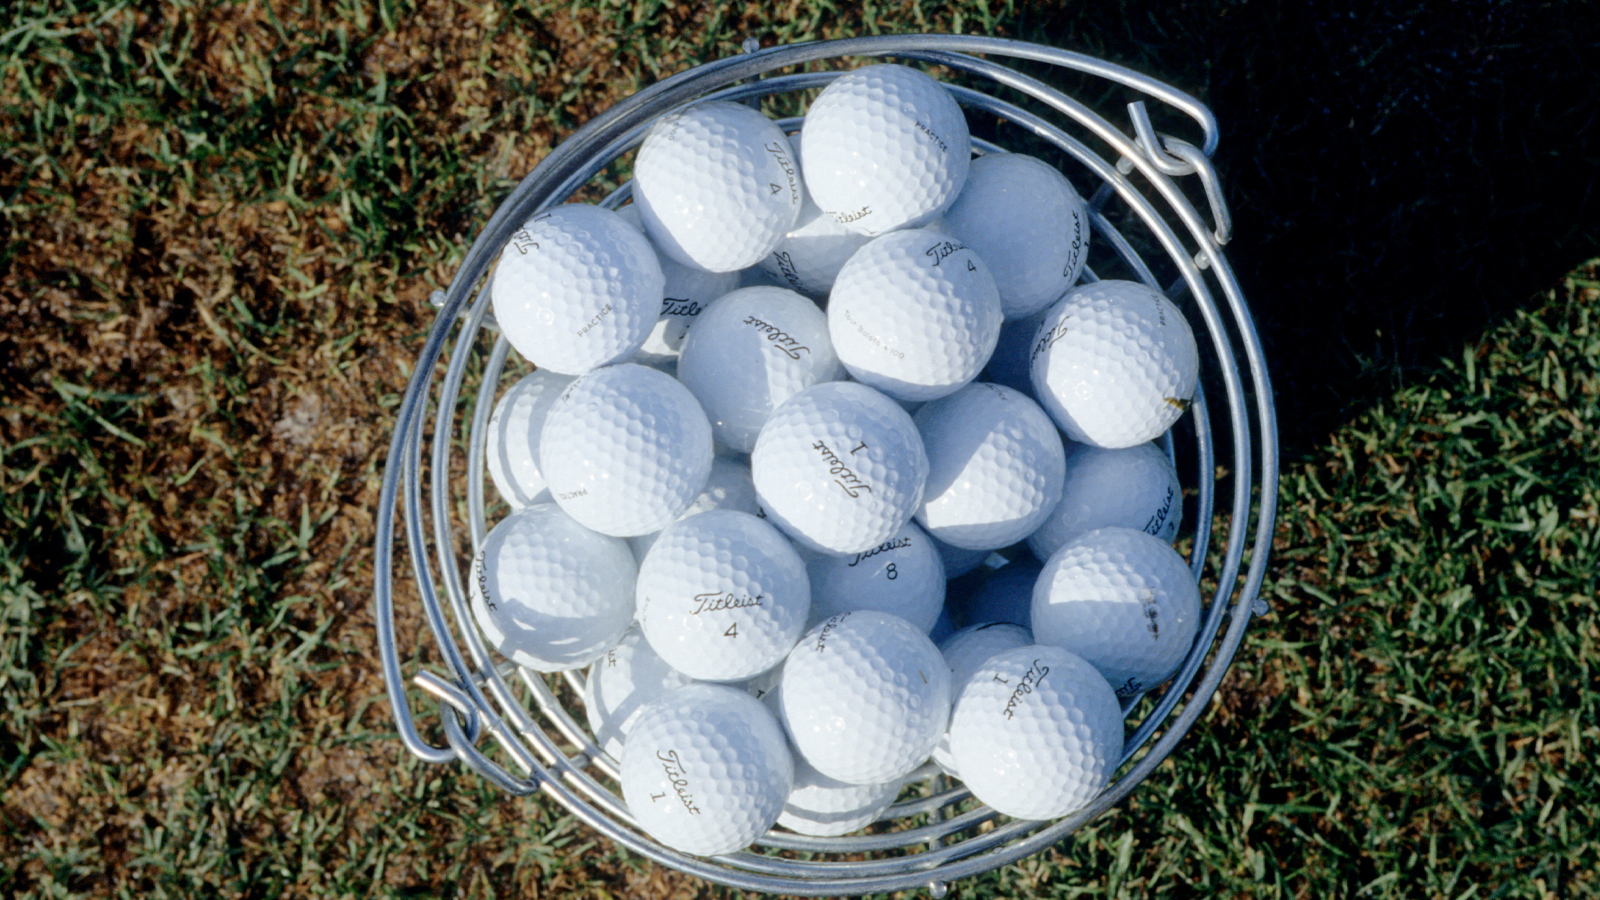 The Purpose and Benefits of a Golf Ball Fitting